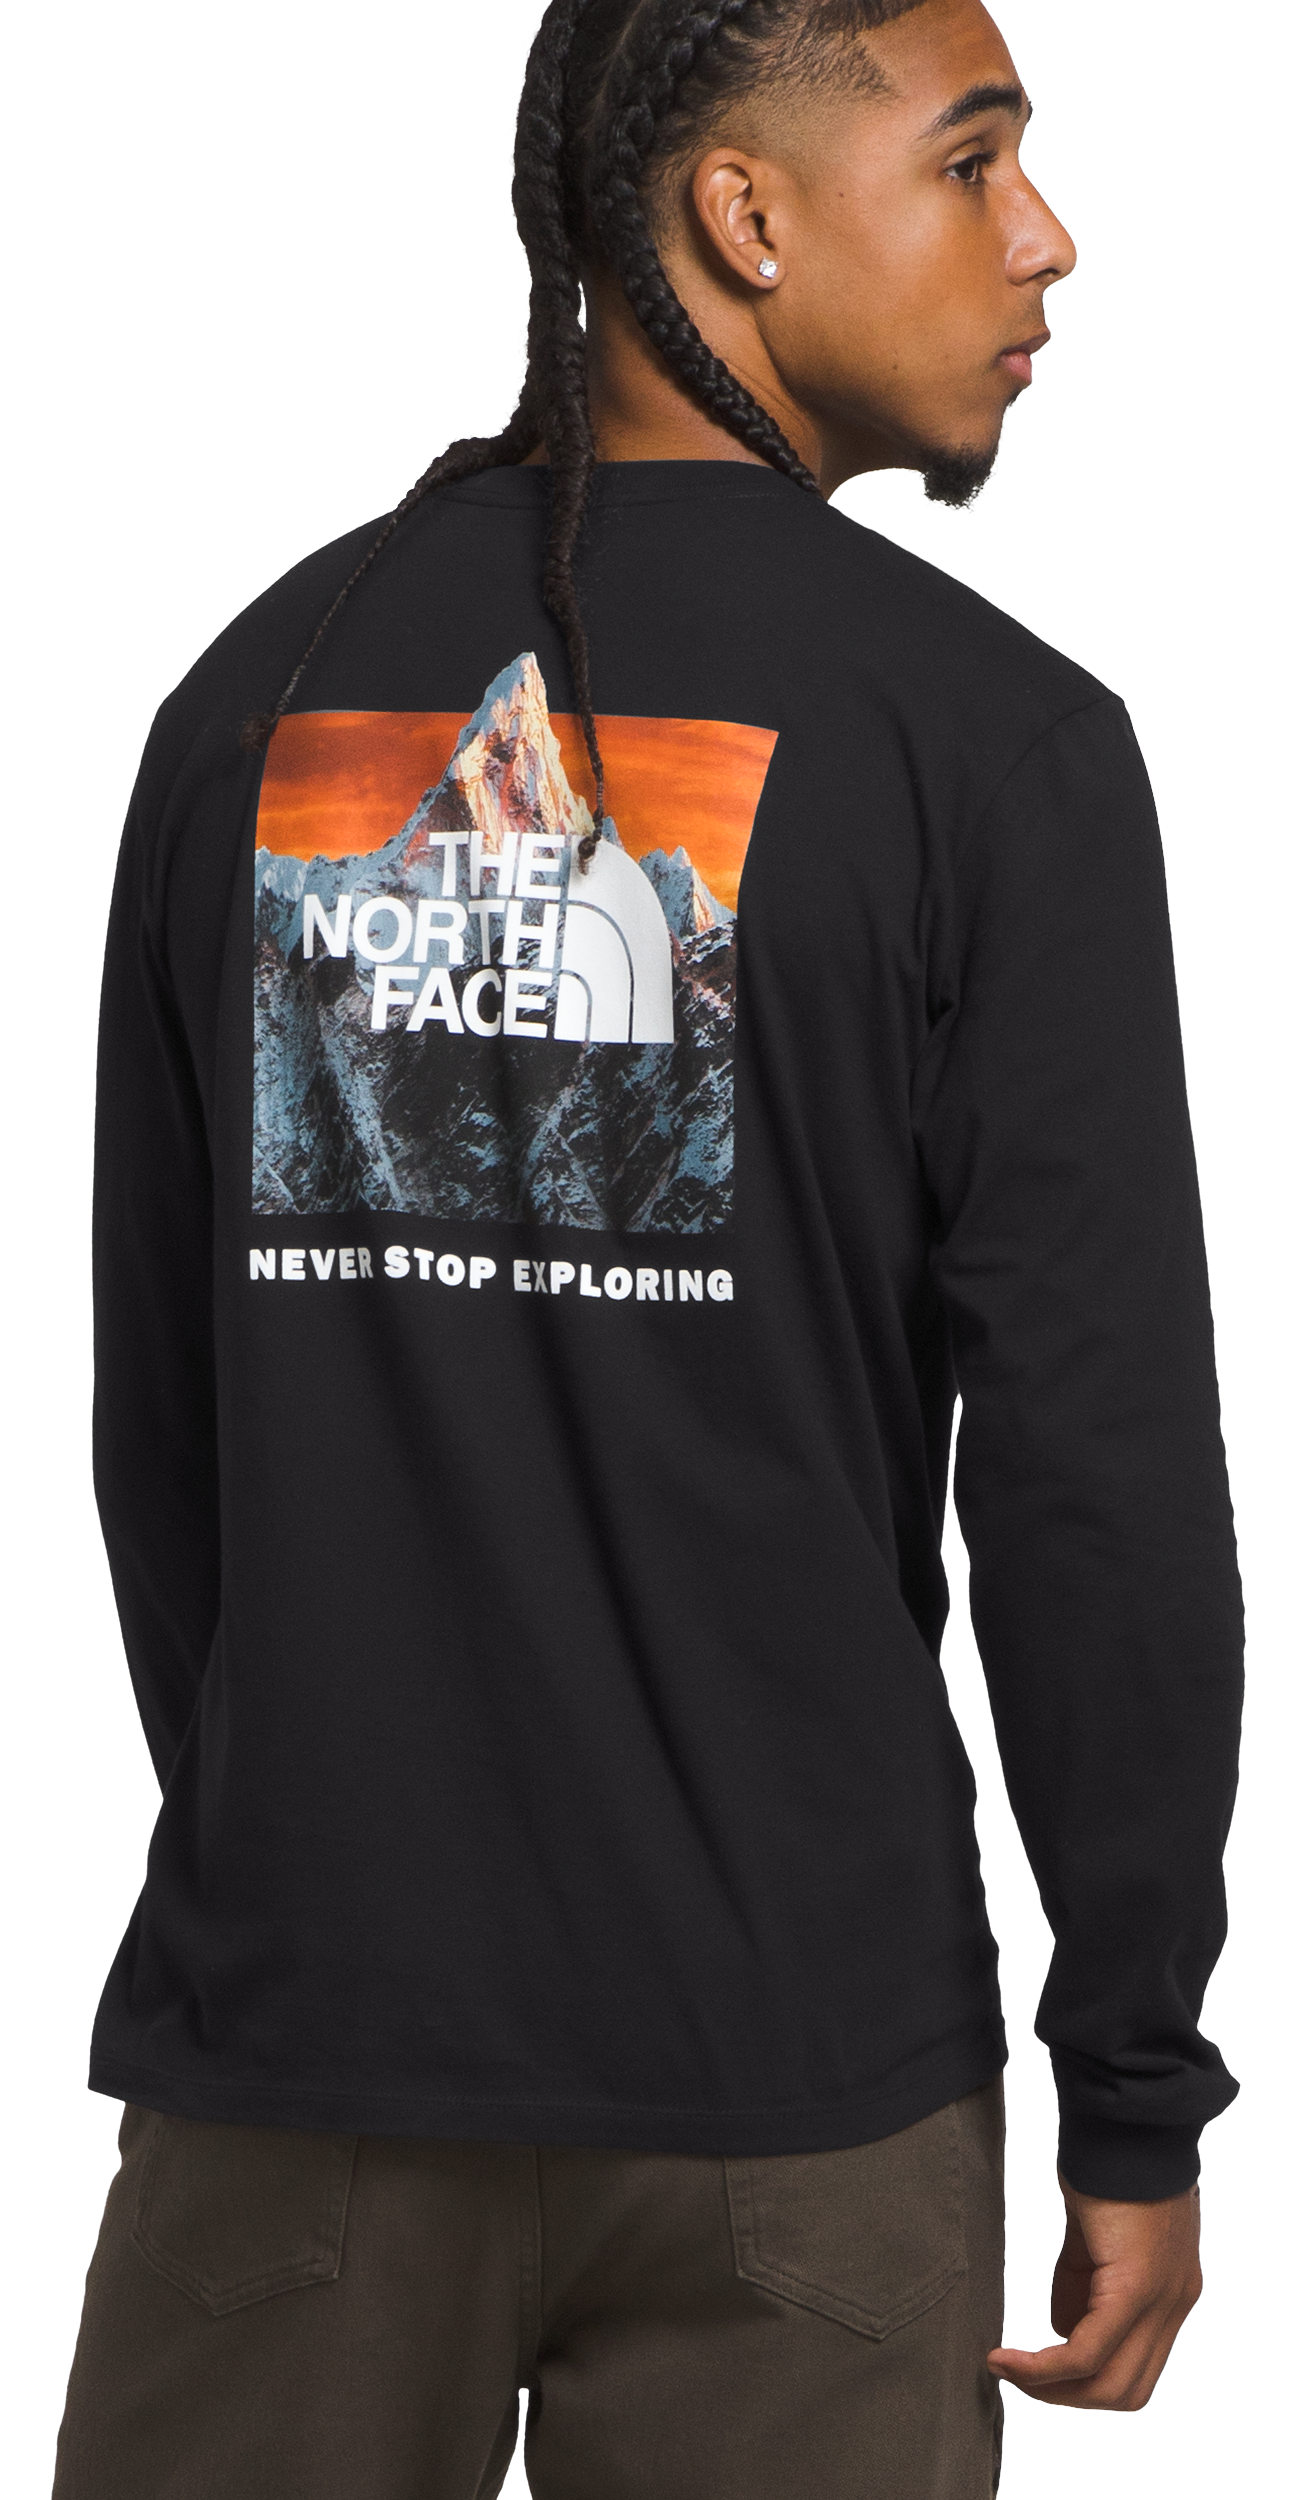 The North Face Box NSE Long-Sleeve Shirt for Men - TNF Black/Photo Real - S